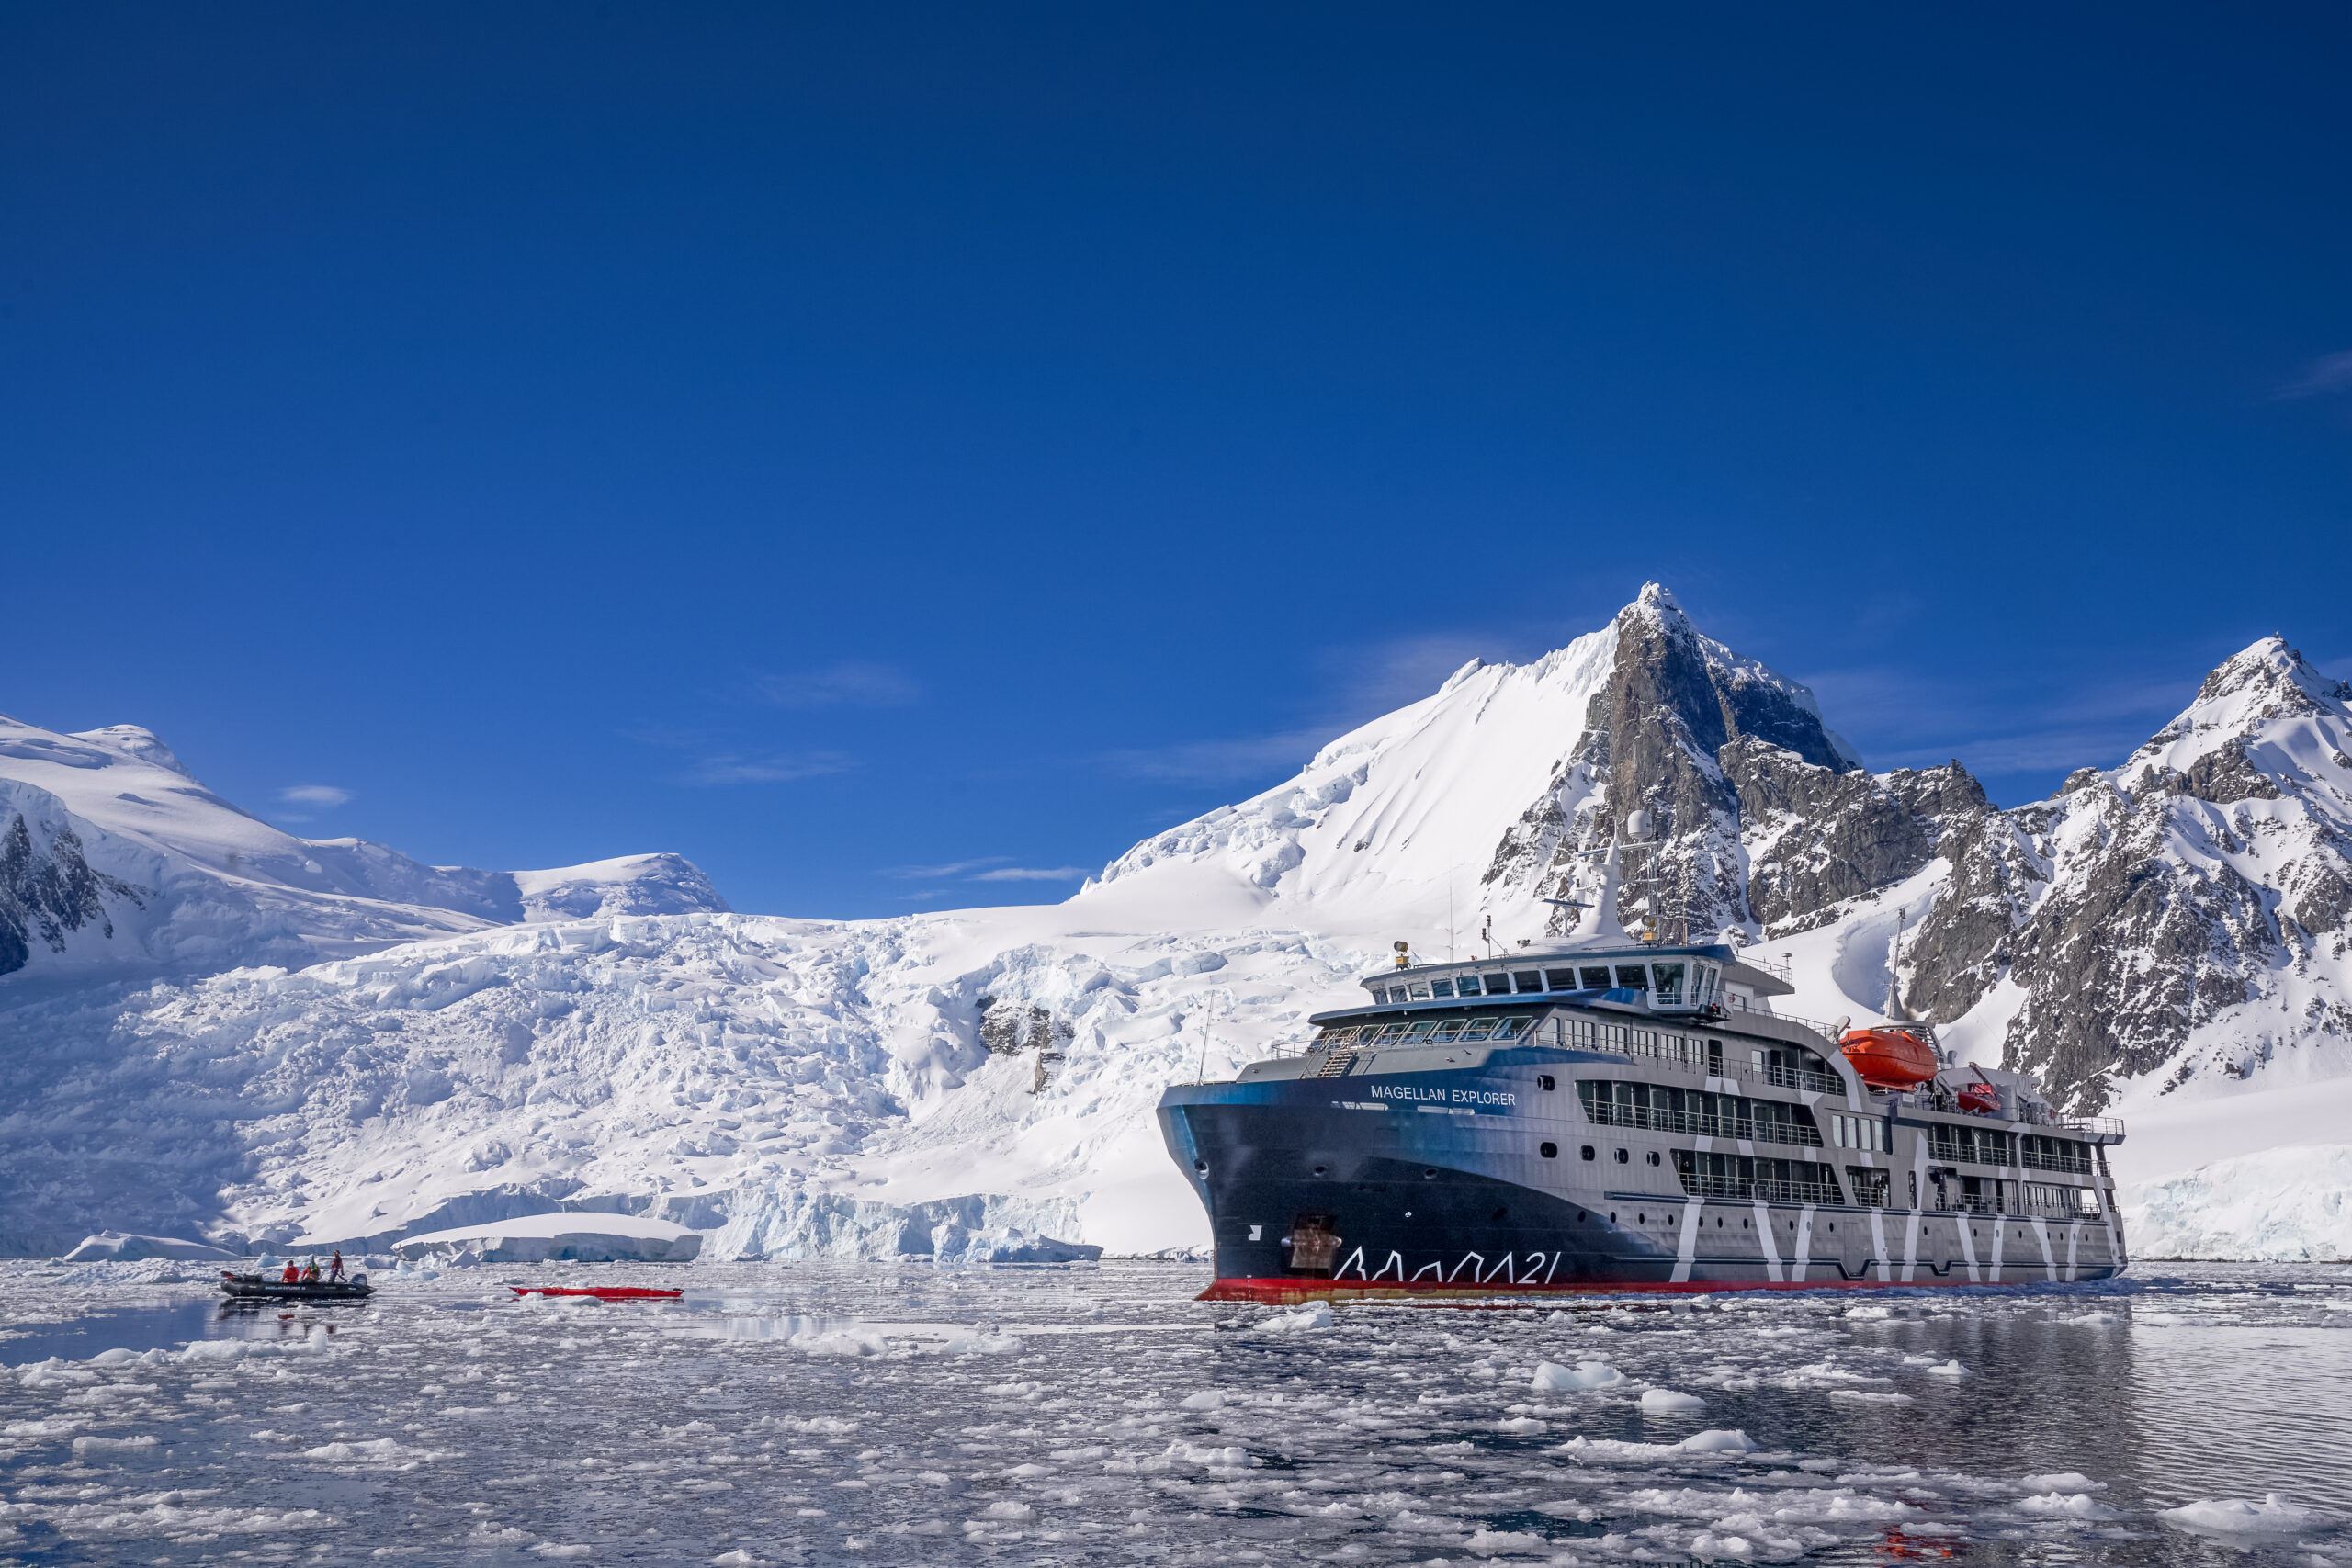 Antarctica21 appoints BRANDit as India Representative; to tap fly-cruise market